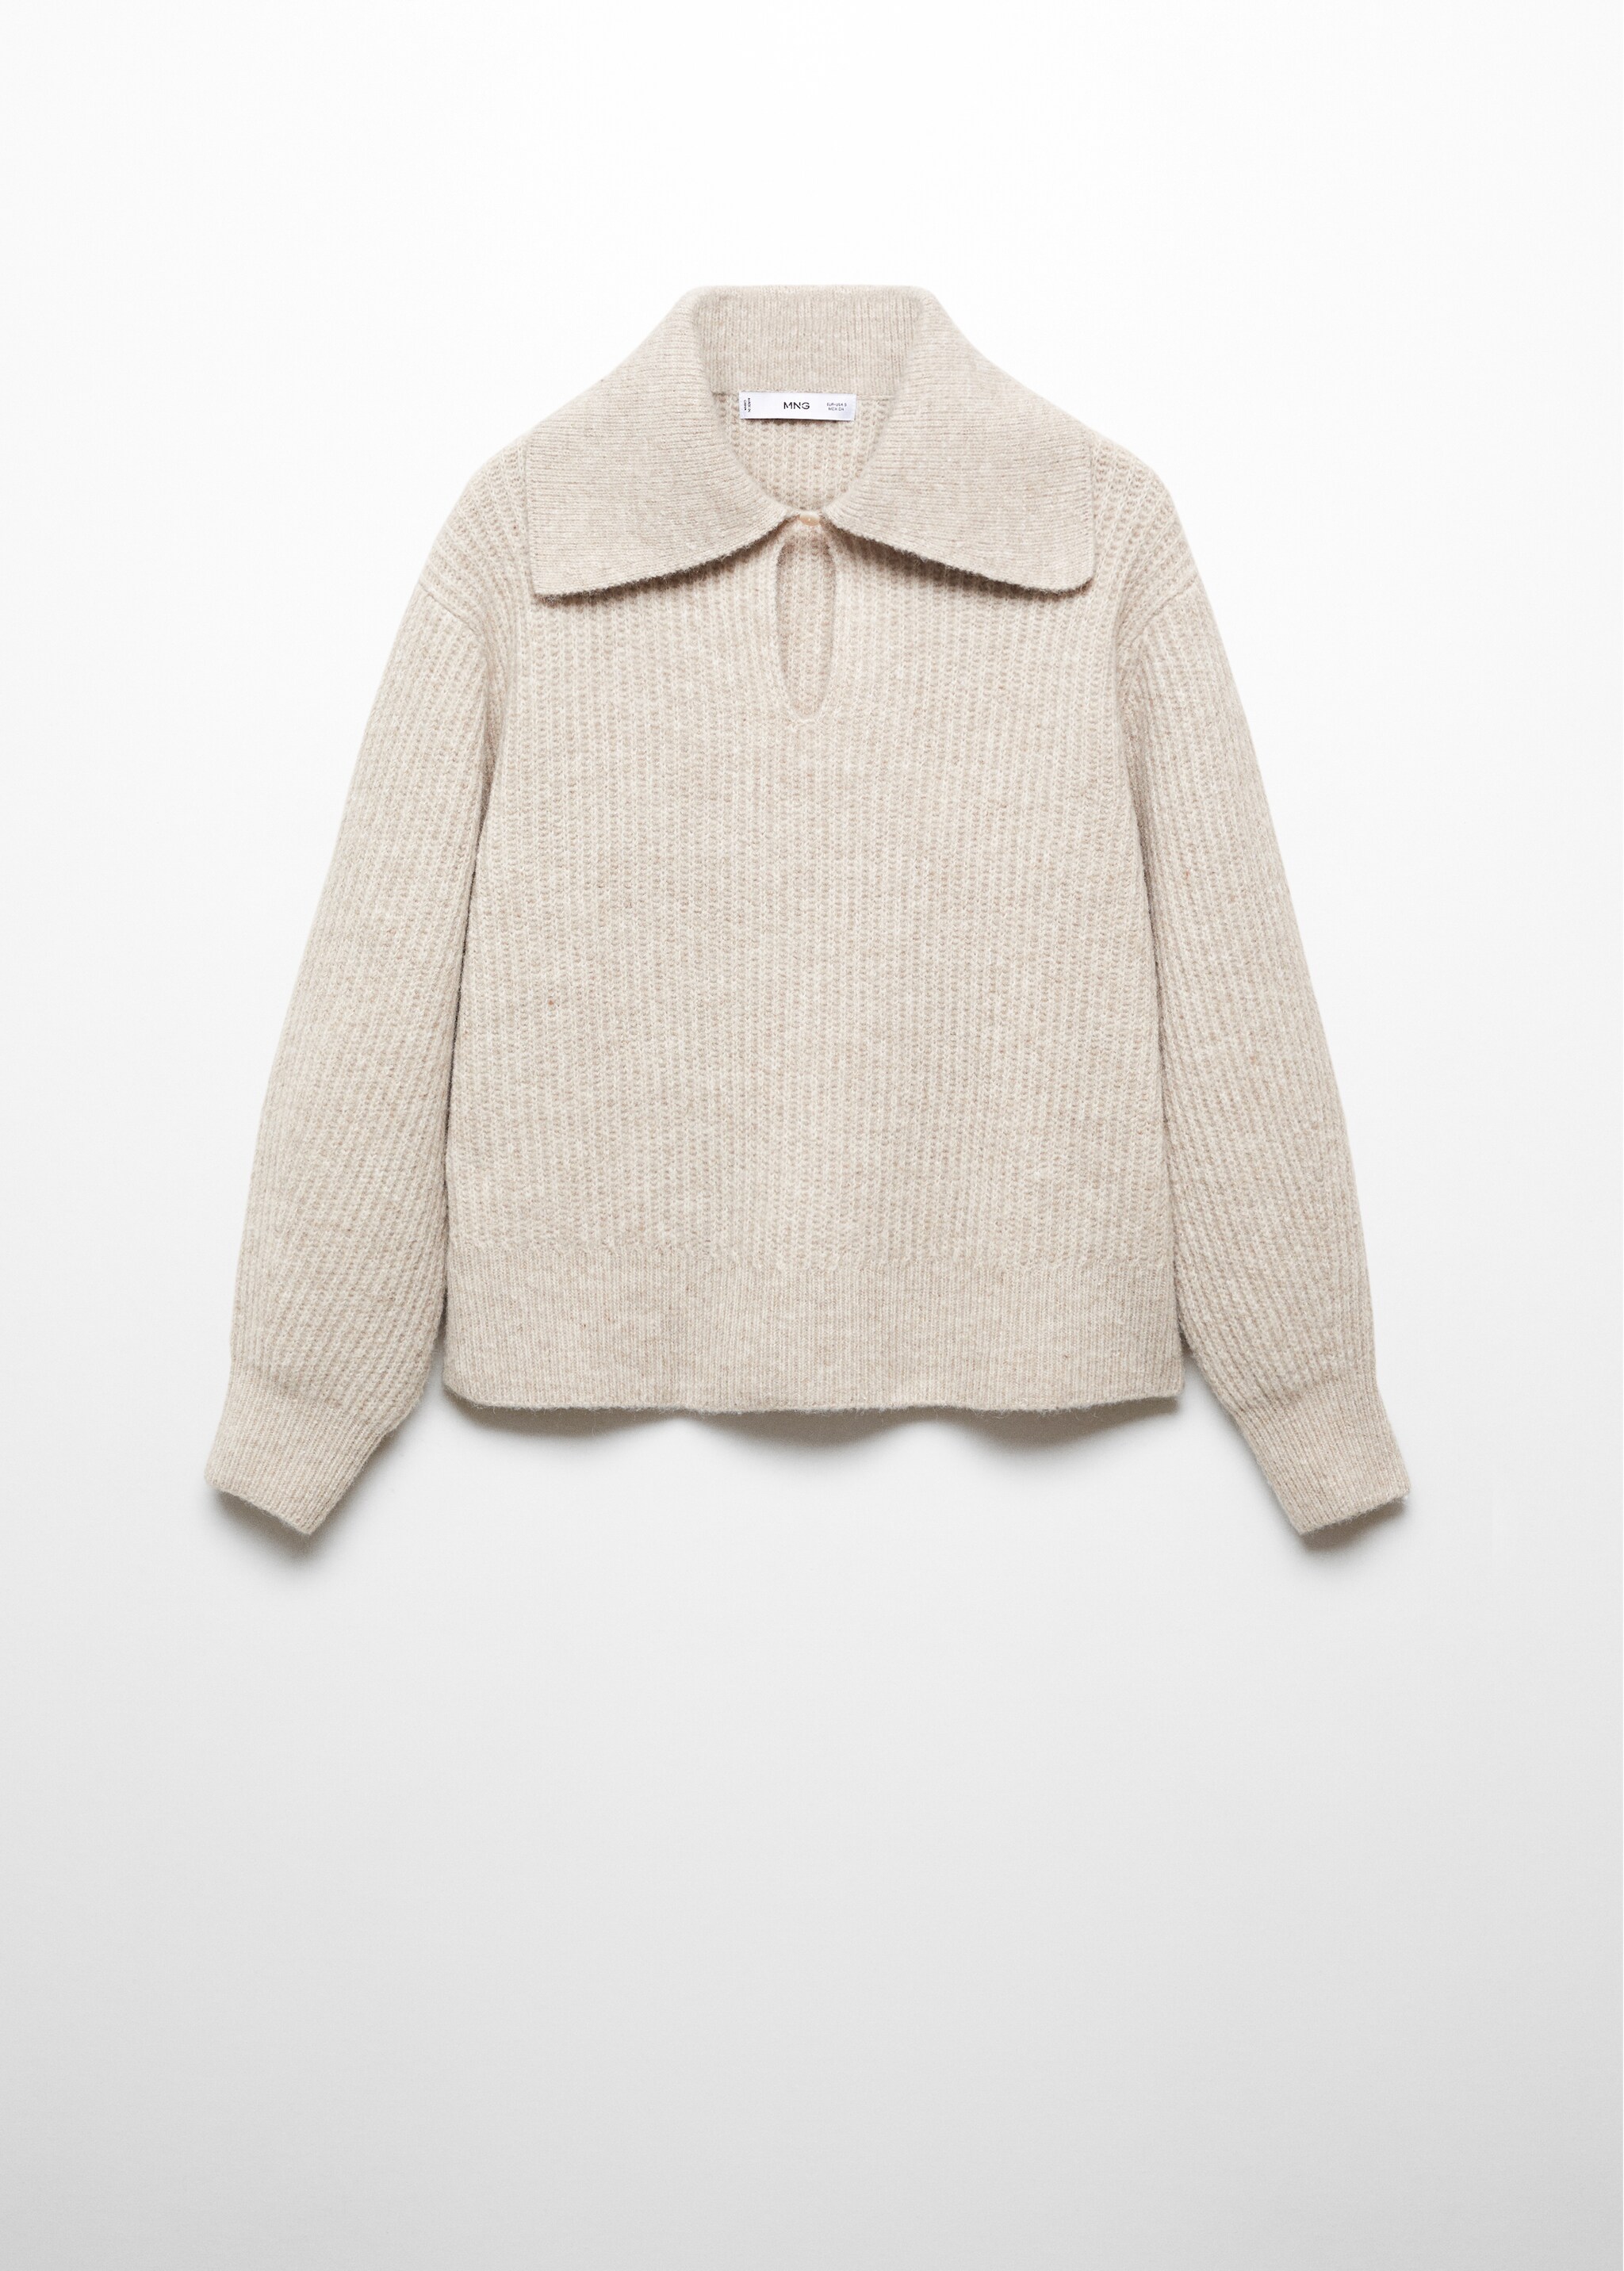 Camp-collar knit sweater - Article without model